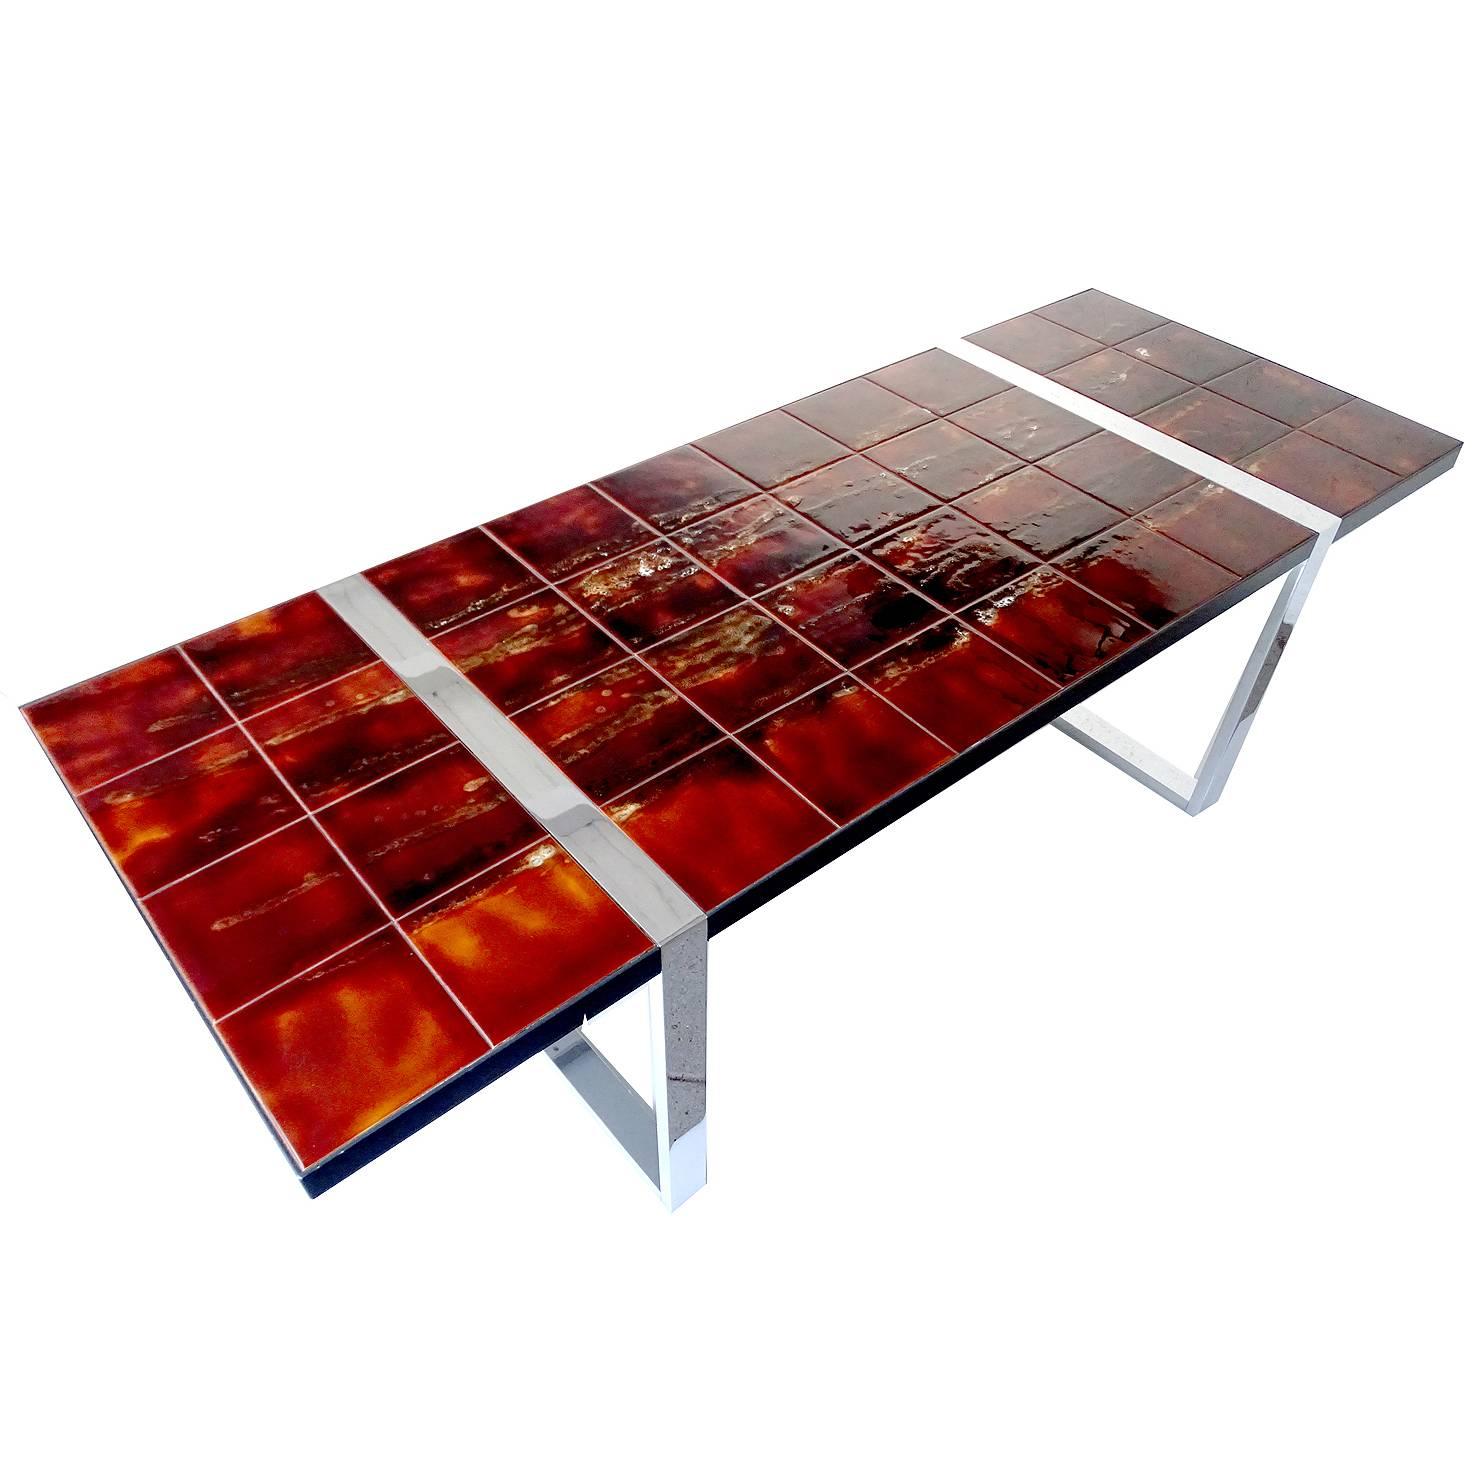 Large Mid-Century coffee or side table featuring handmade ceramic tiles supported by a chrome frame.

The original Spanish glazed tiles mounted on the tabletop were produced in flamed hues ranging from dark marron to a sienna yellow / orange and